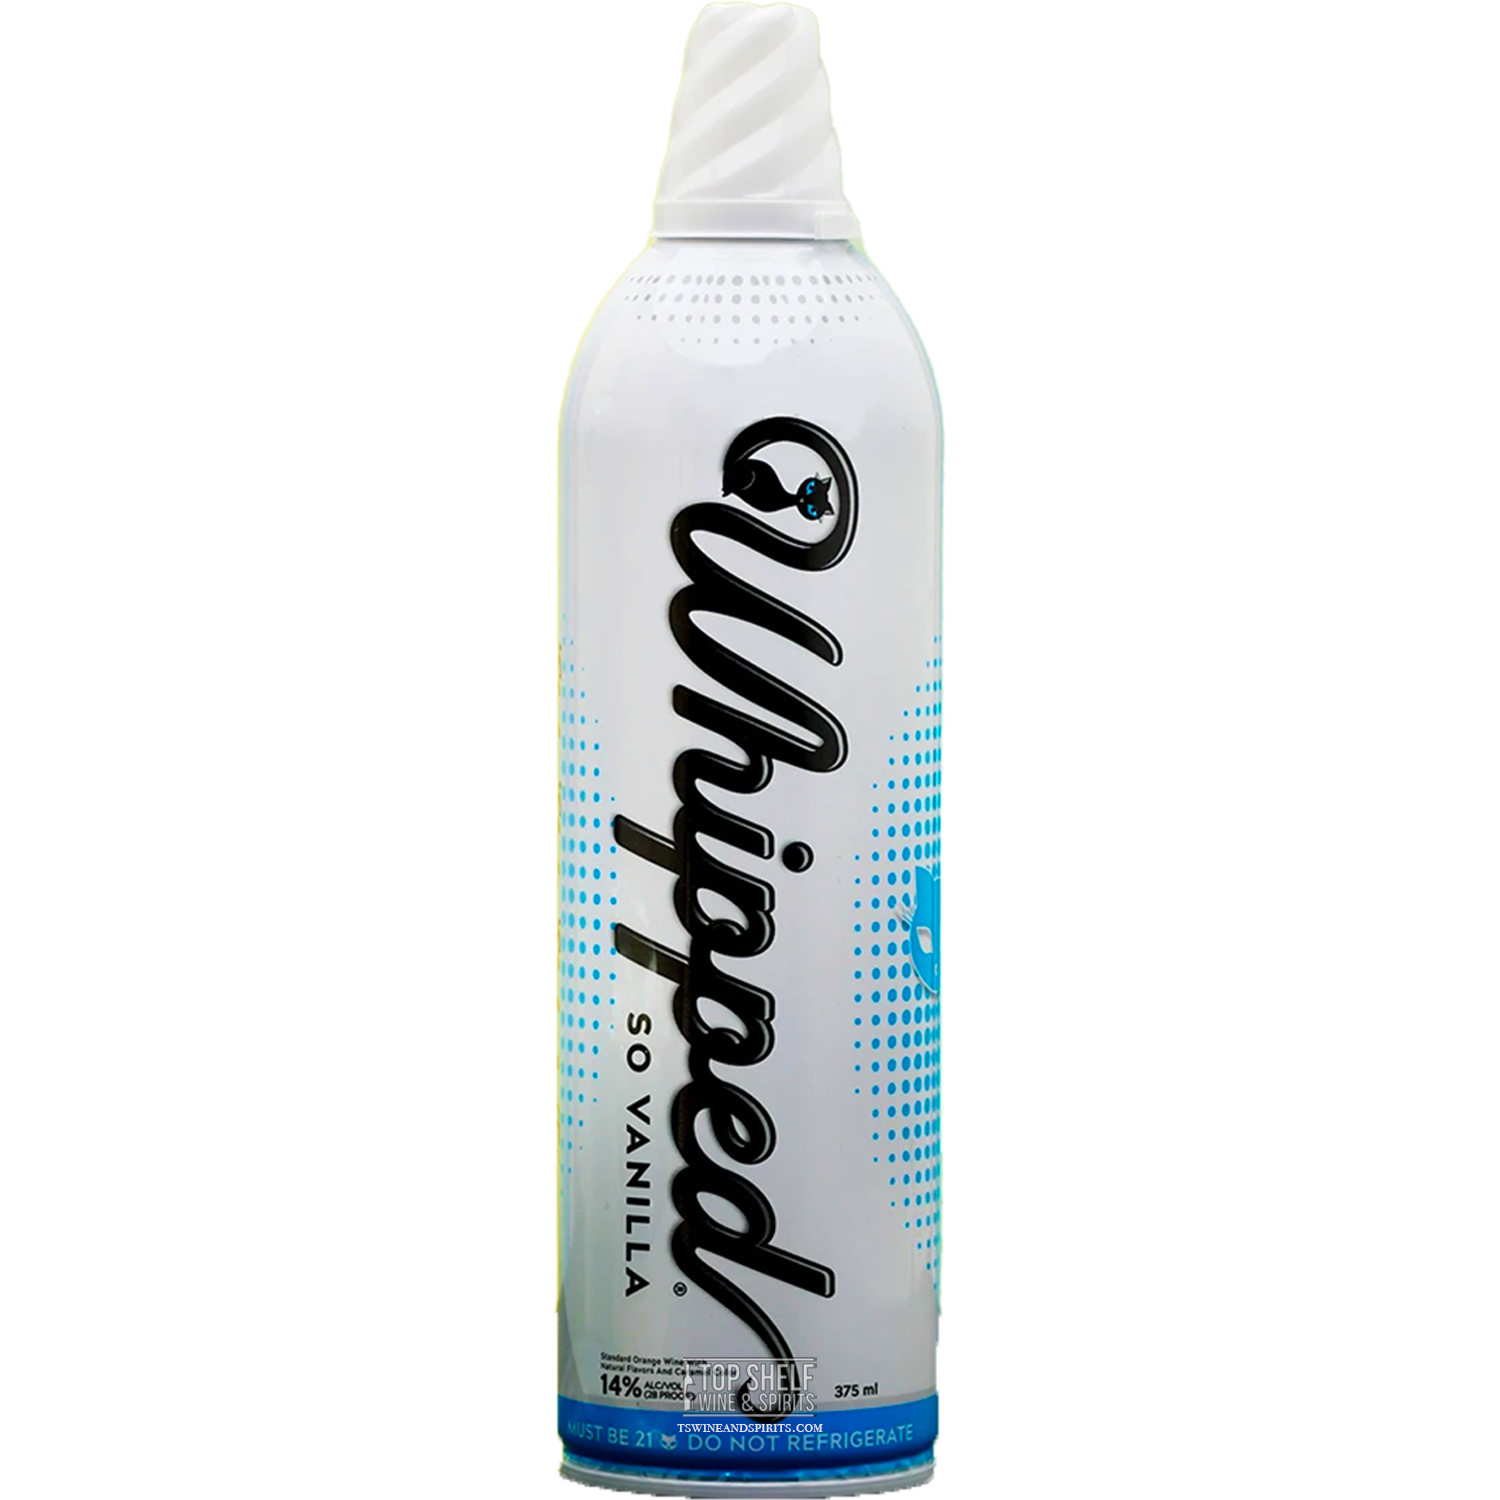 Lick the Whip So Vanilla (Alcohol Infused Whipped Cream) 375mL